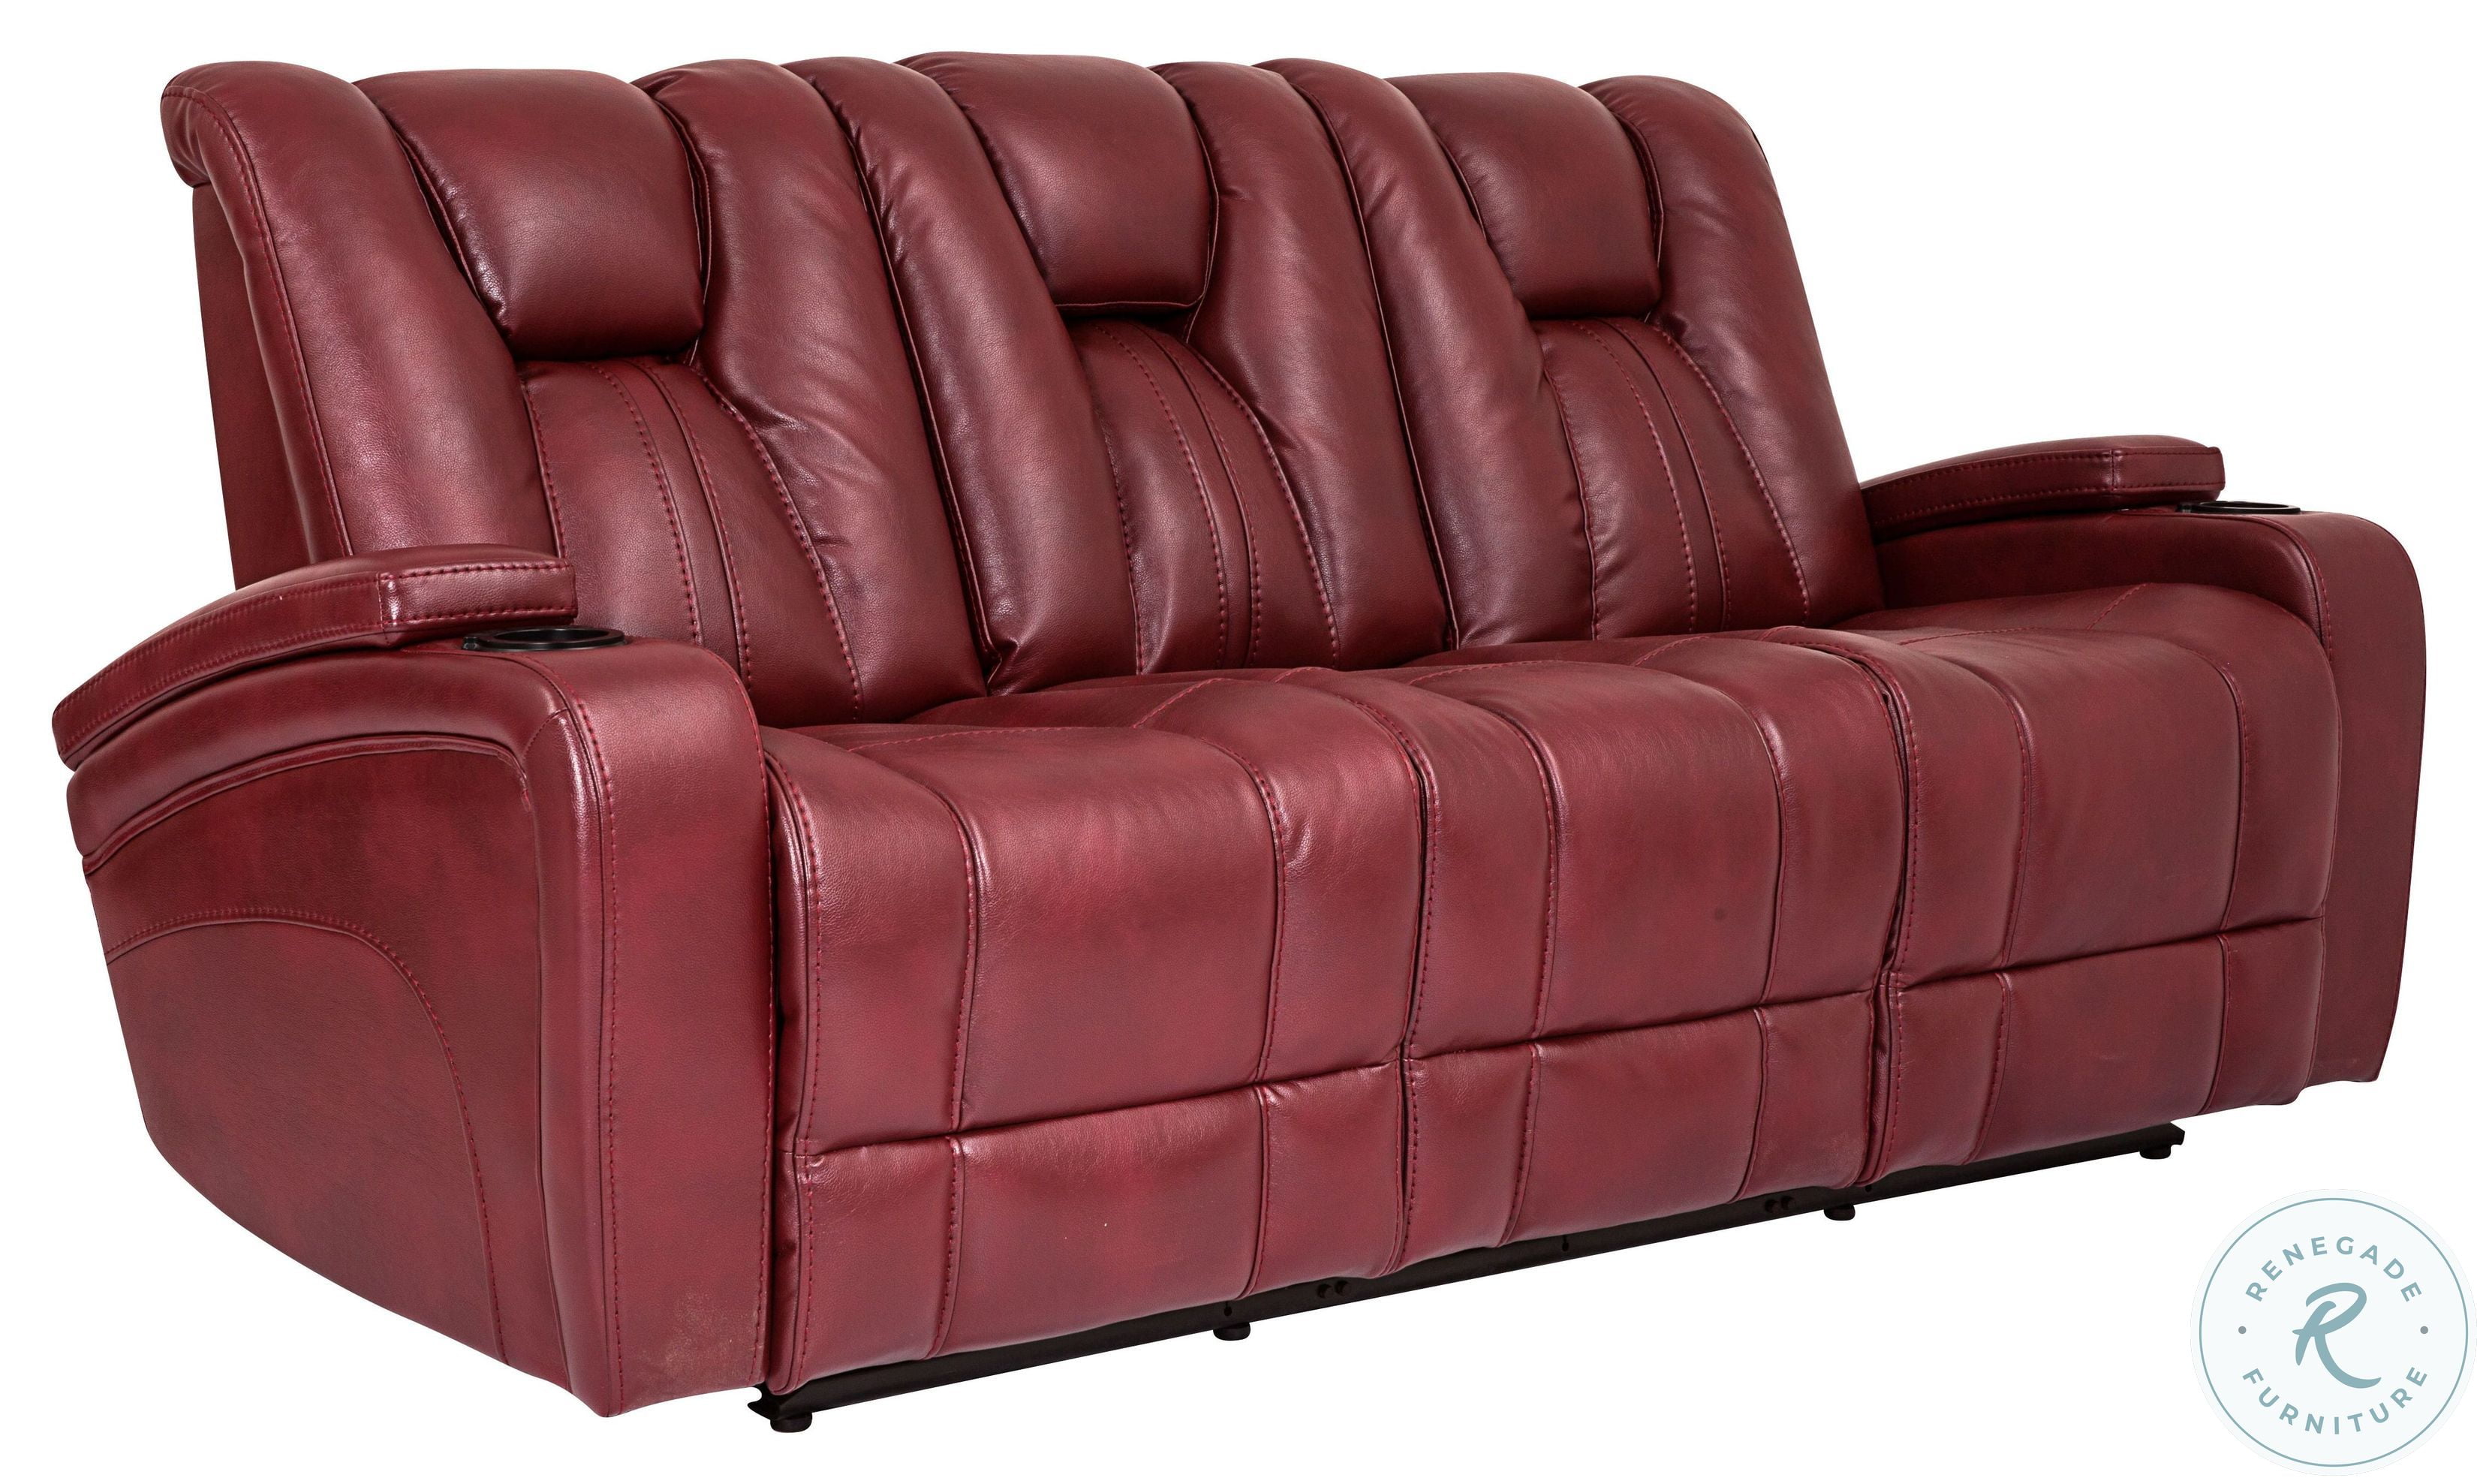 Dakota Red Dual Power Reclining Sofa with Power Headrest and Drop Down Table